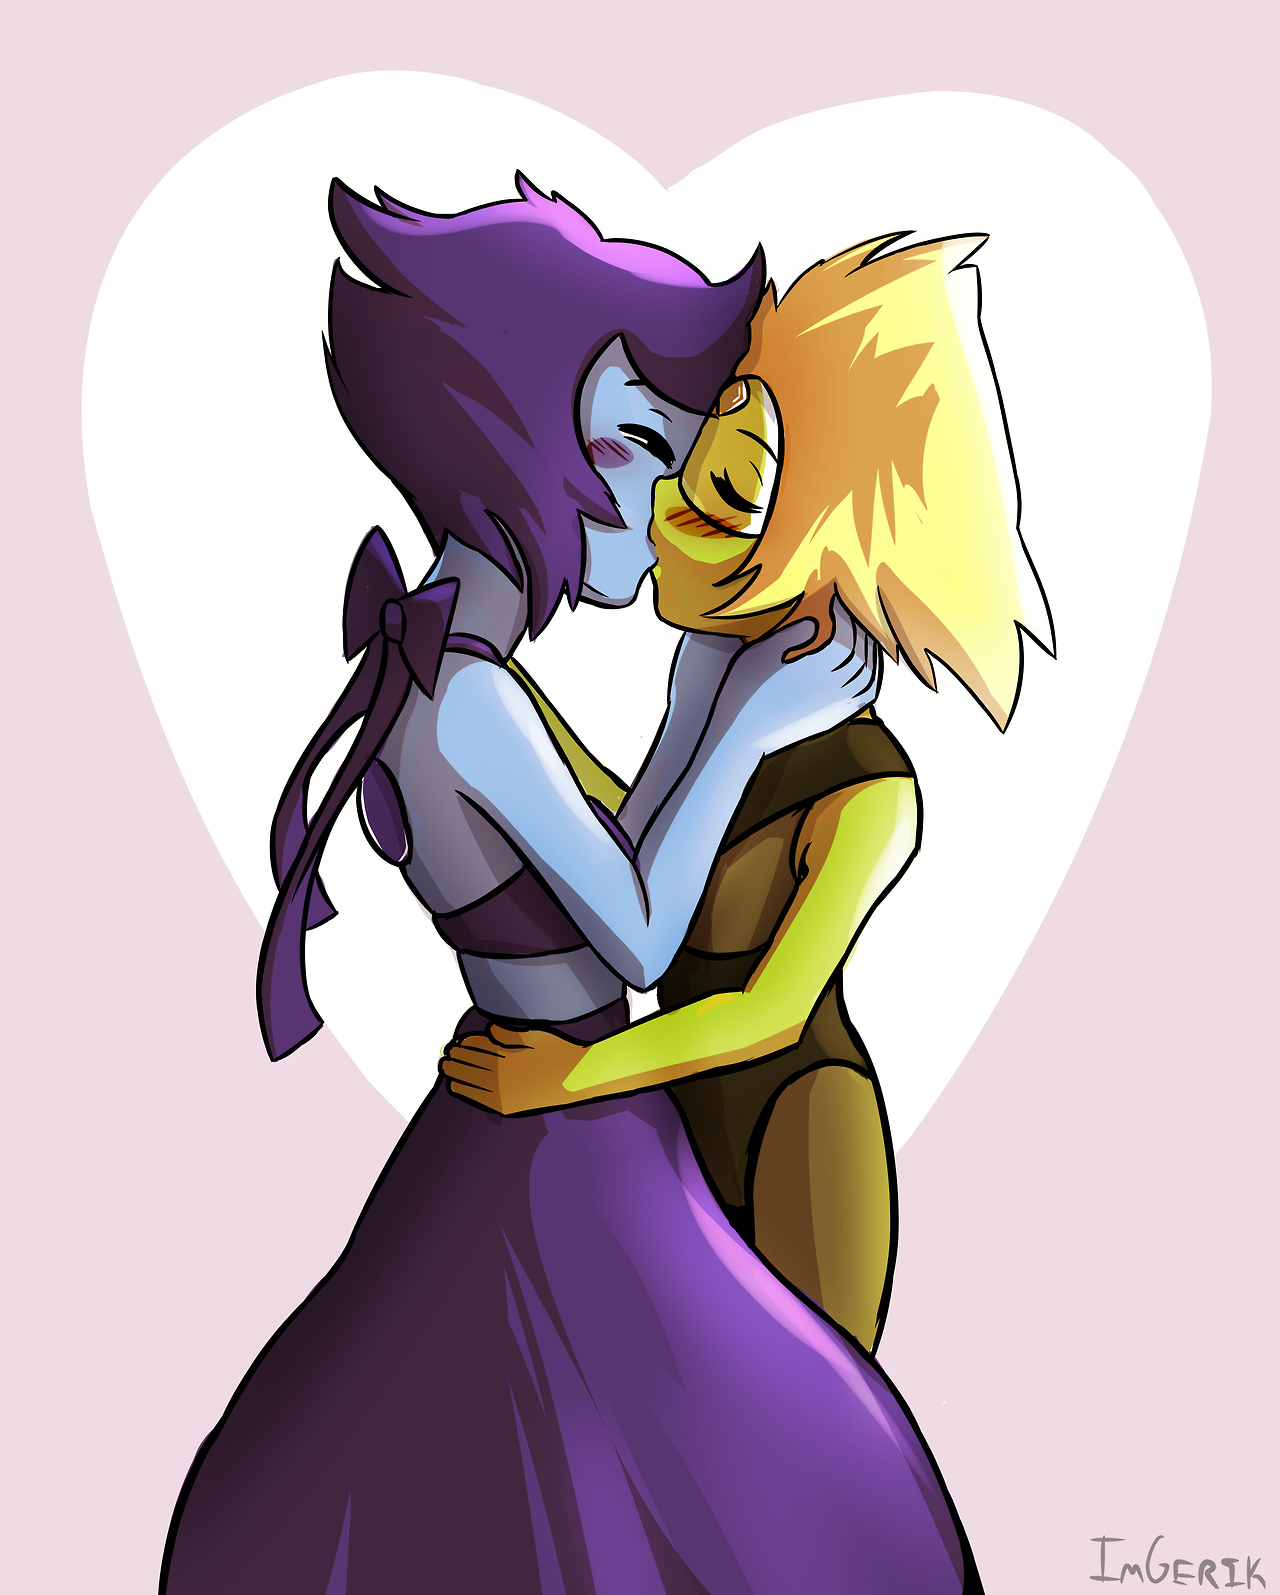 More Lapidot! 

 Might end up drawing these two more.